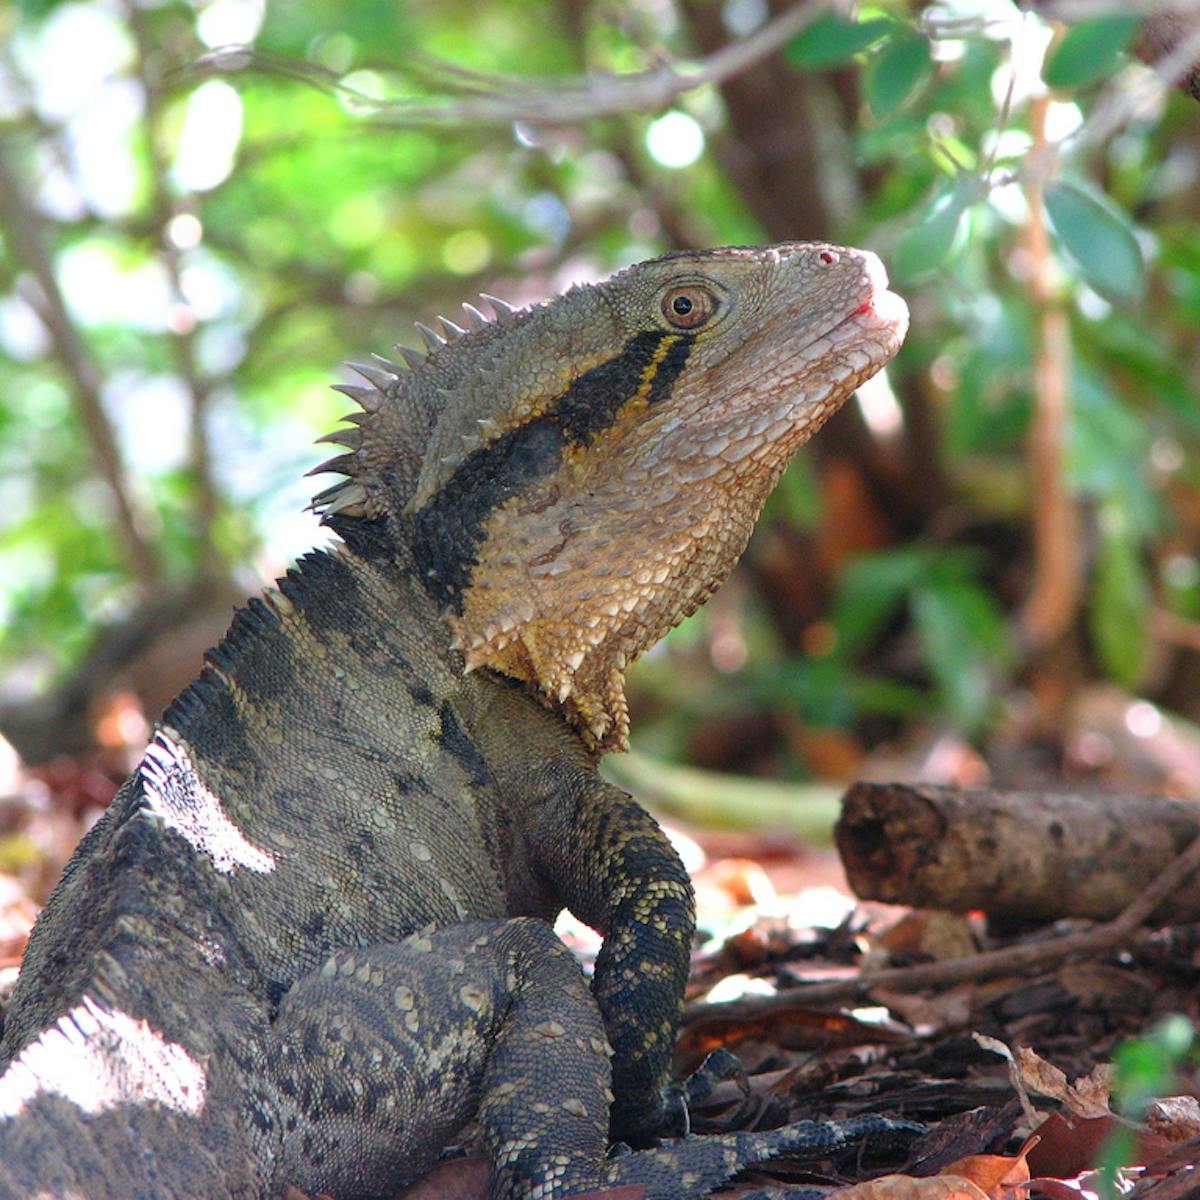 There's no such thing as reptiles any more – and here's why